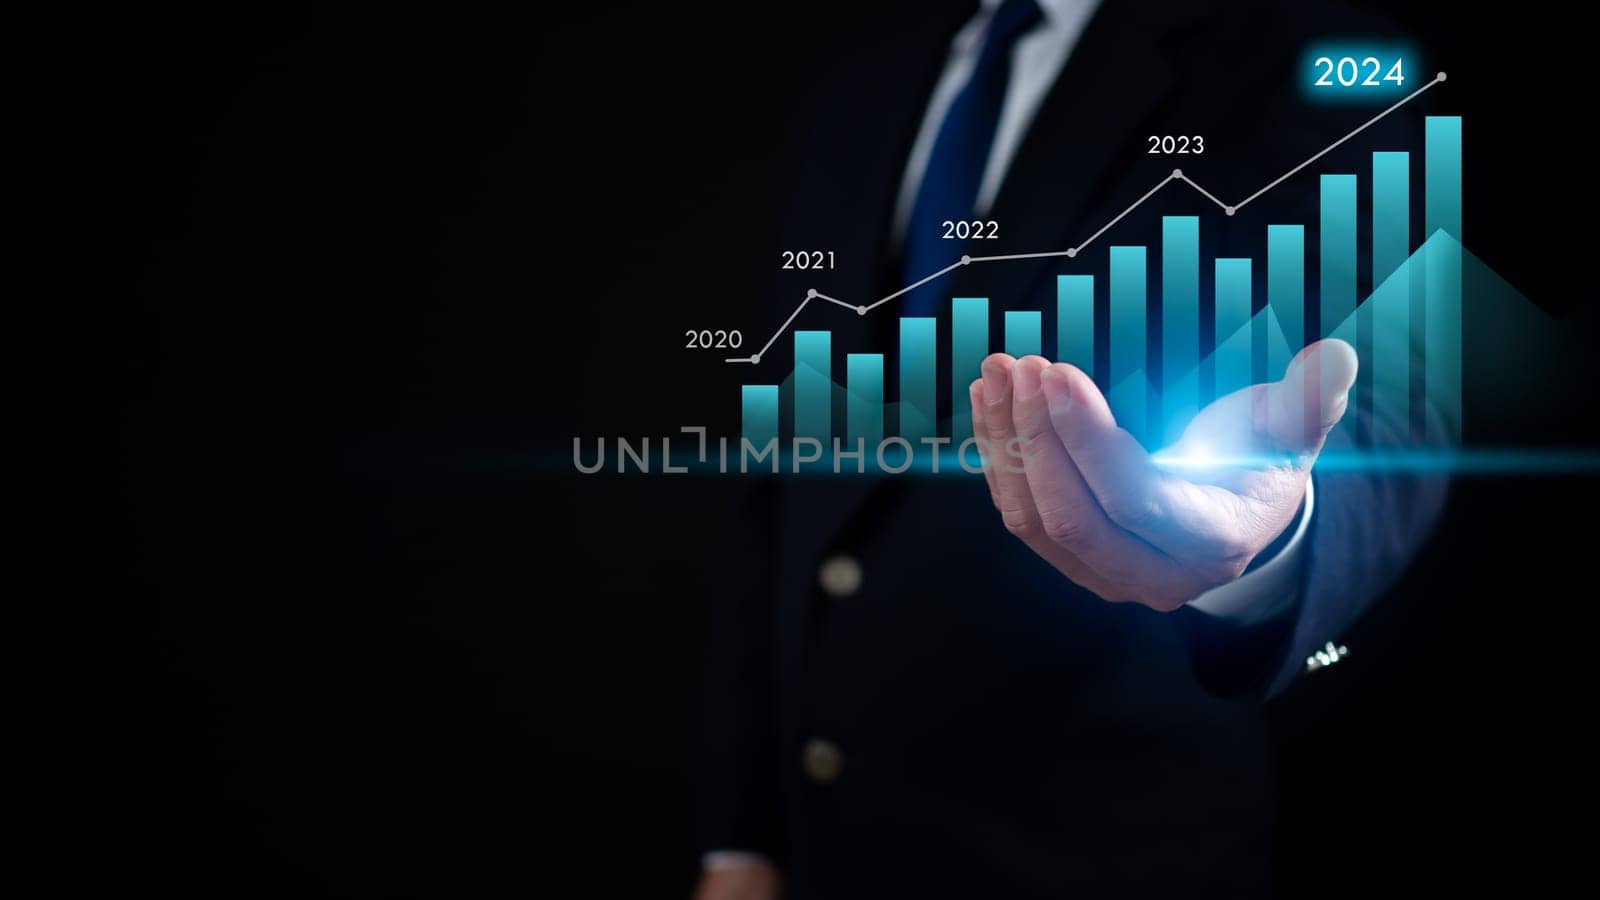 Stock trading. Finance. Investing. Growing business. Businessman in a suit is holding a virtual graph It represents growth of stocks and business in 2024.